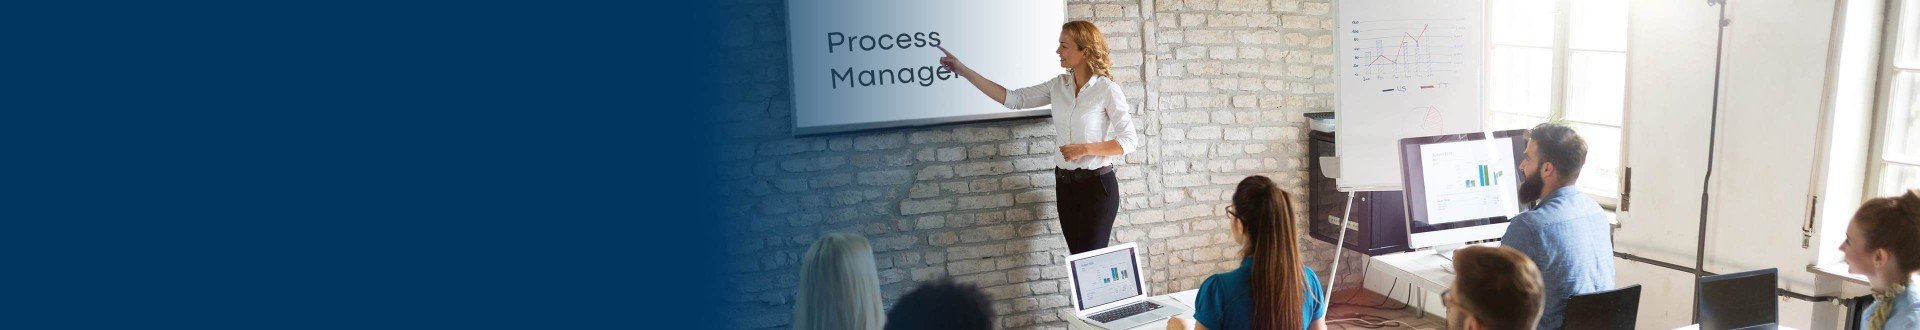 Process Manager OMNITRACKER Trainings 3840x660